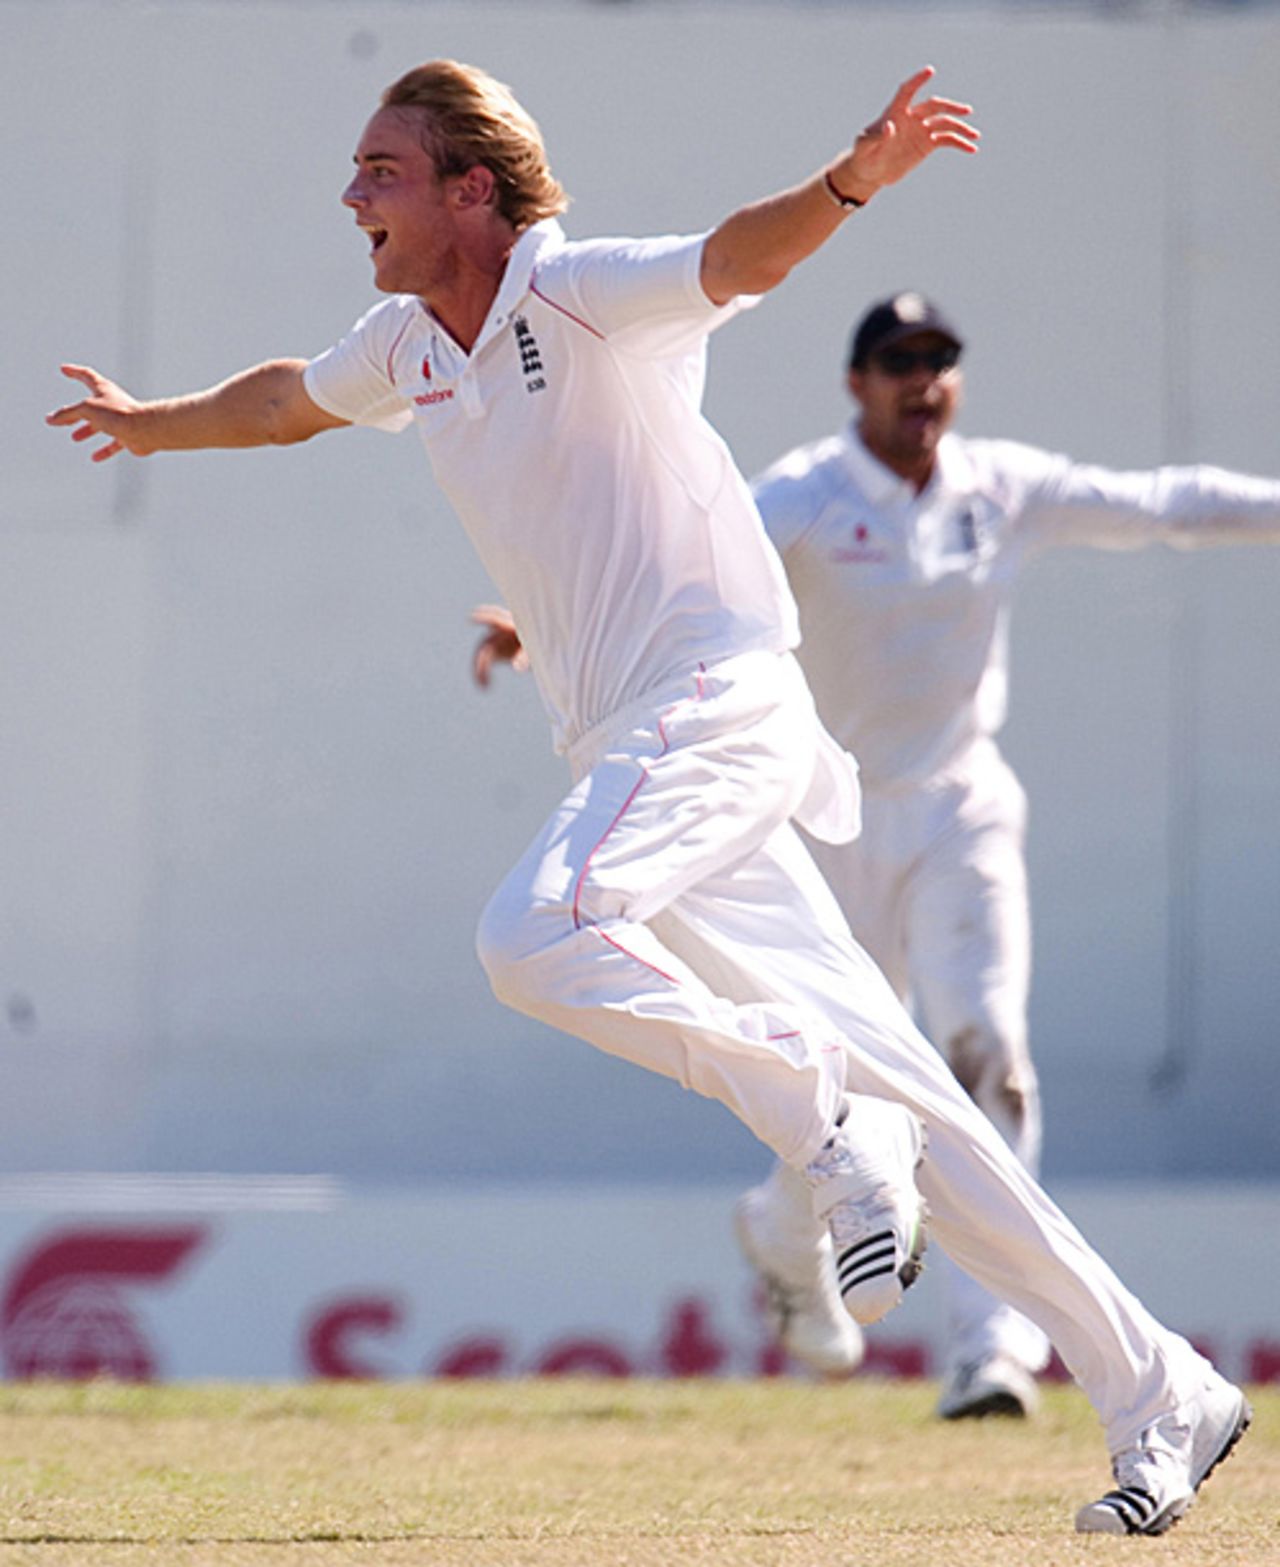 Flying high: Stuart Broad celebrates the wicket of Shivnarine Chanderpaul in an inspired spell with the new ball, West Indies v England, 3rd Test, Antigua, 5th day, February 19, 2009